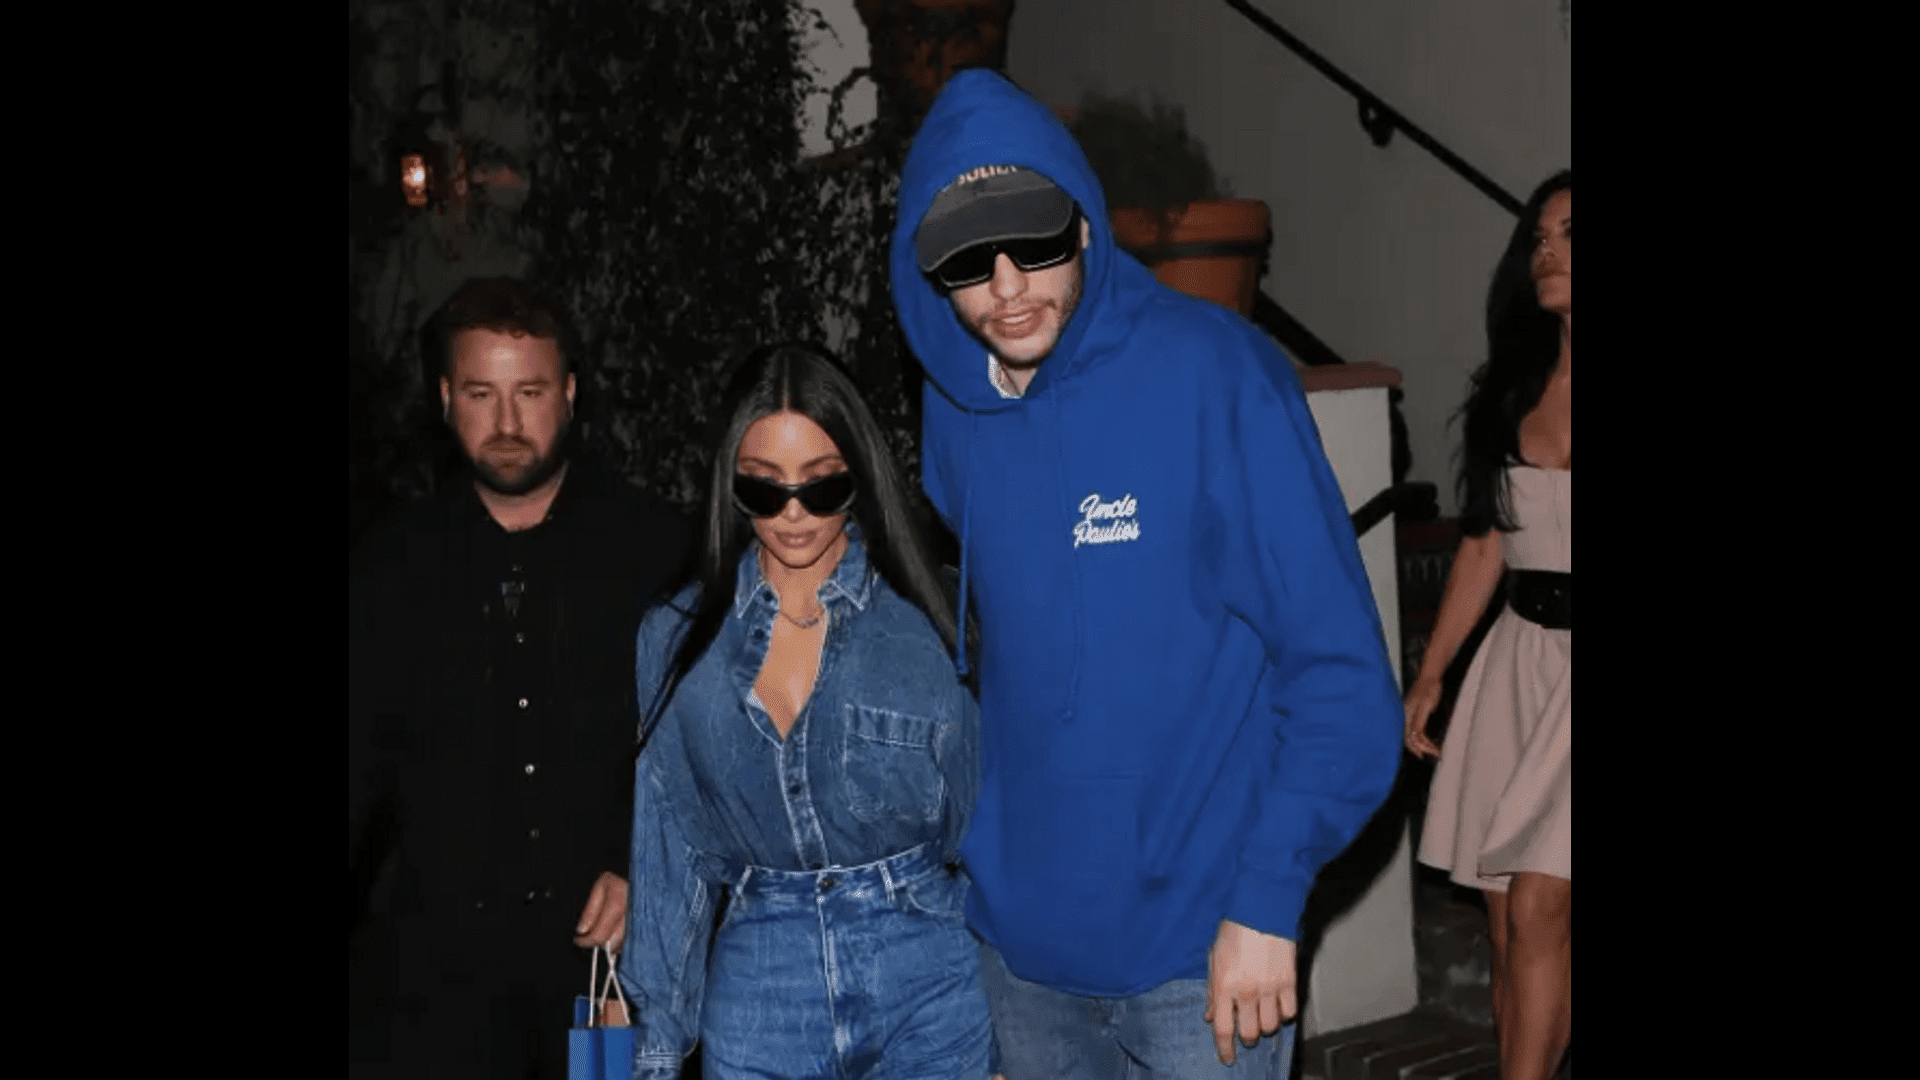 ”who-did-kim-kardashian-and-pete-davidson-double-date-with”